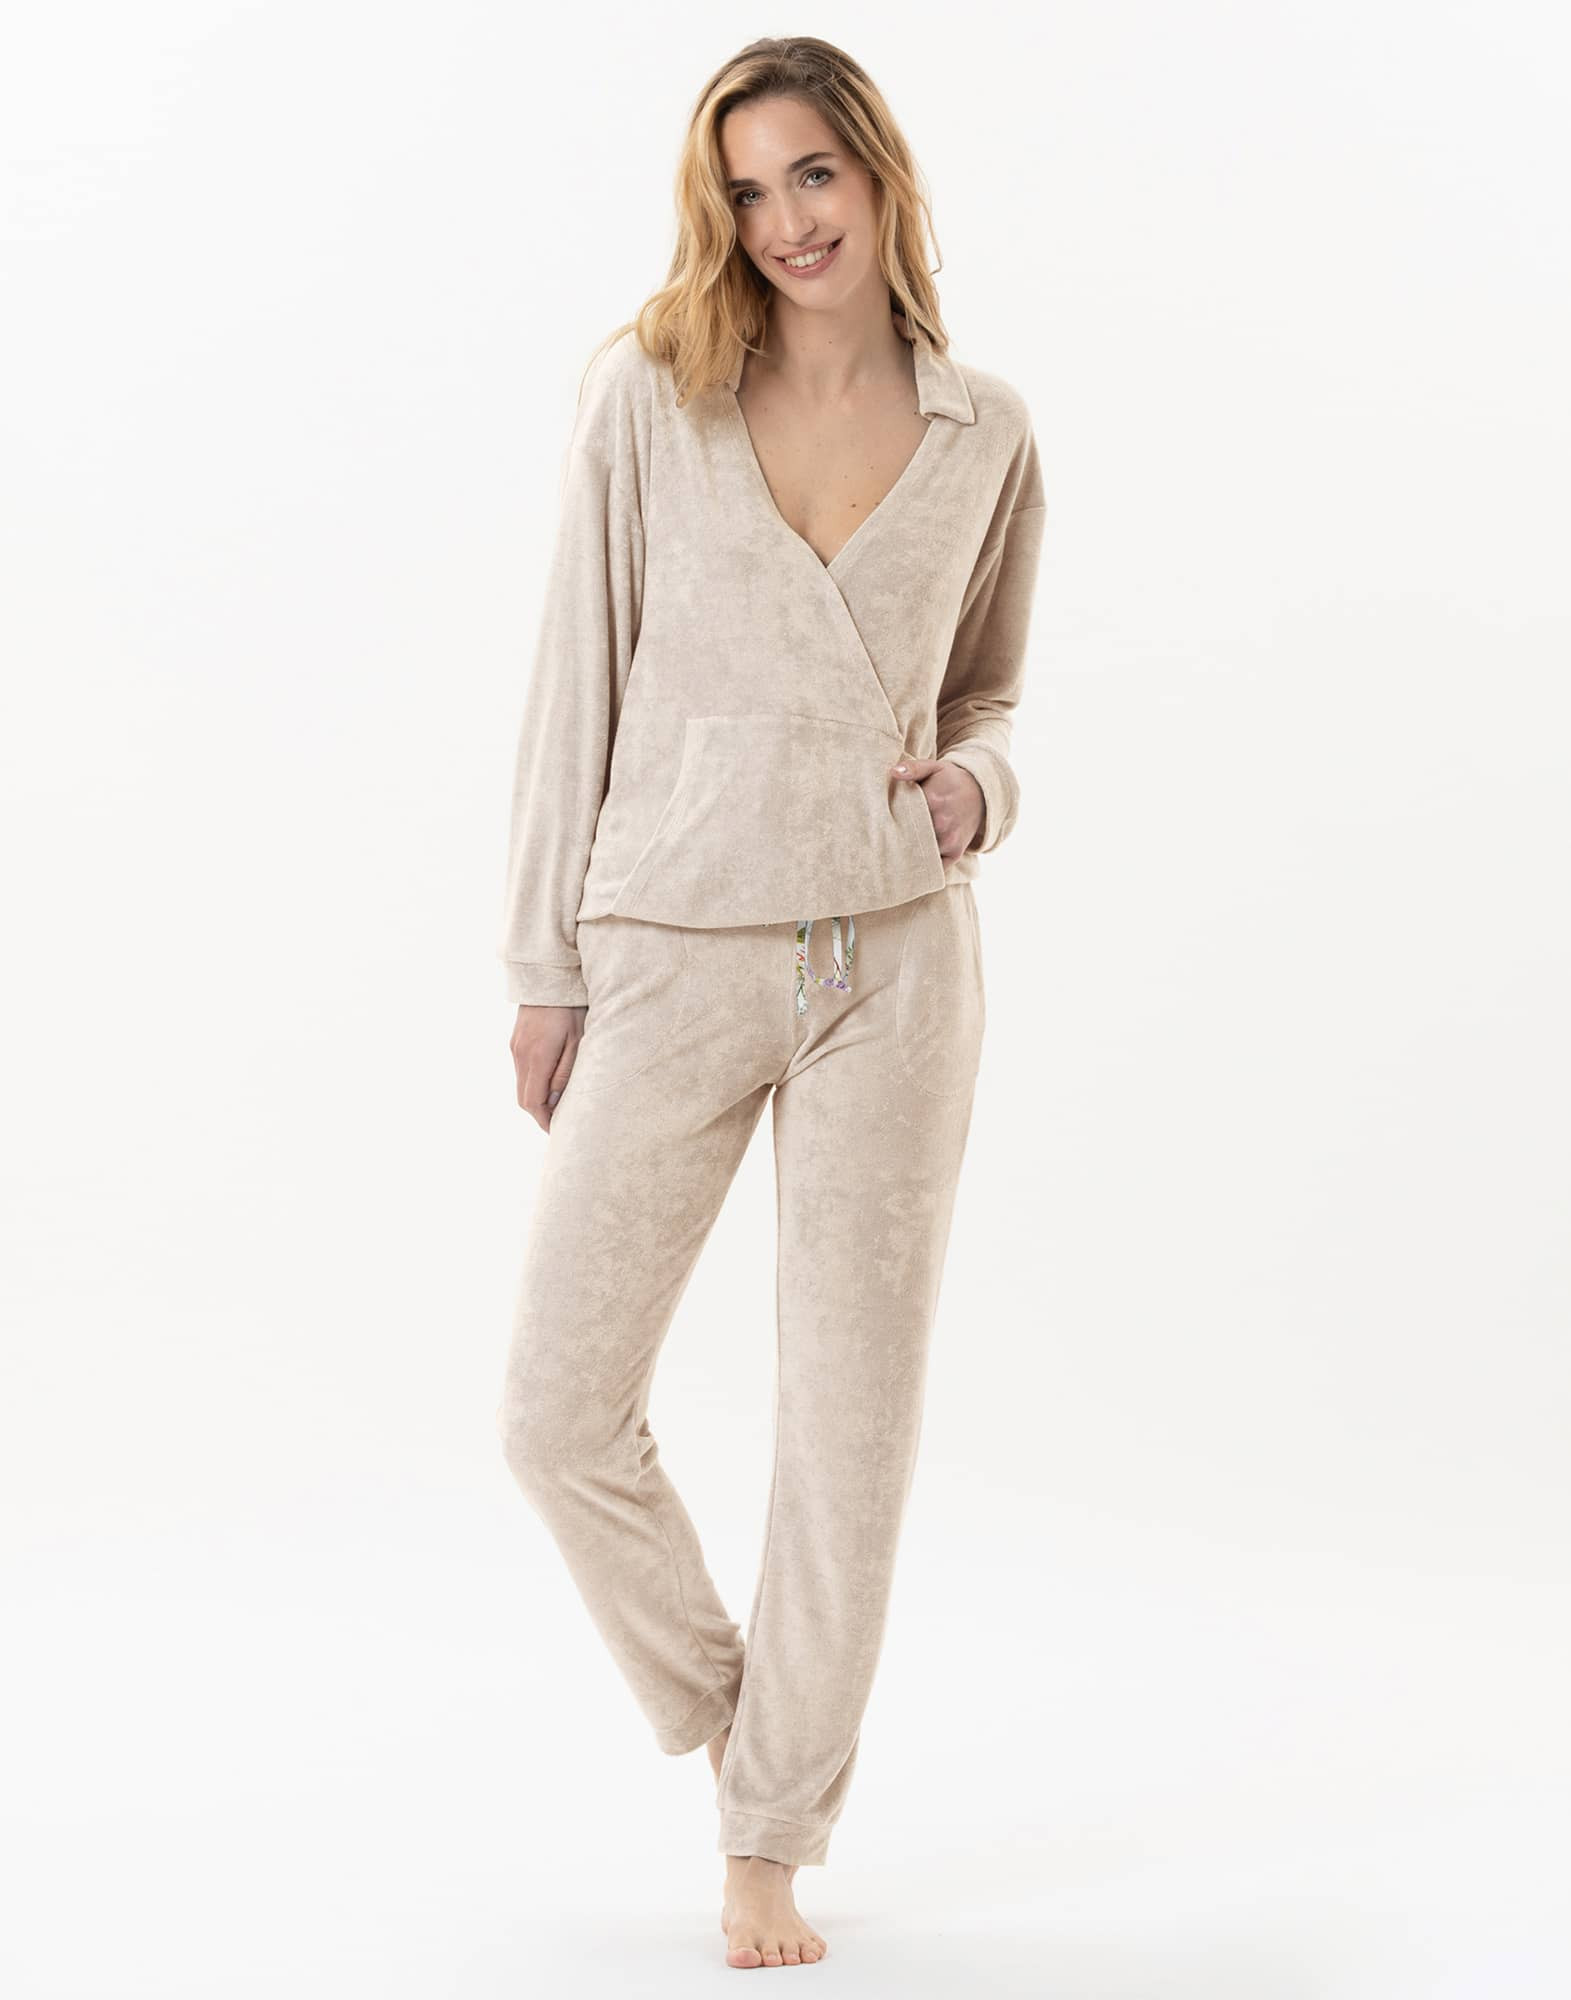 Terry-cloth jogging suit RIVIERA 712 shell